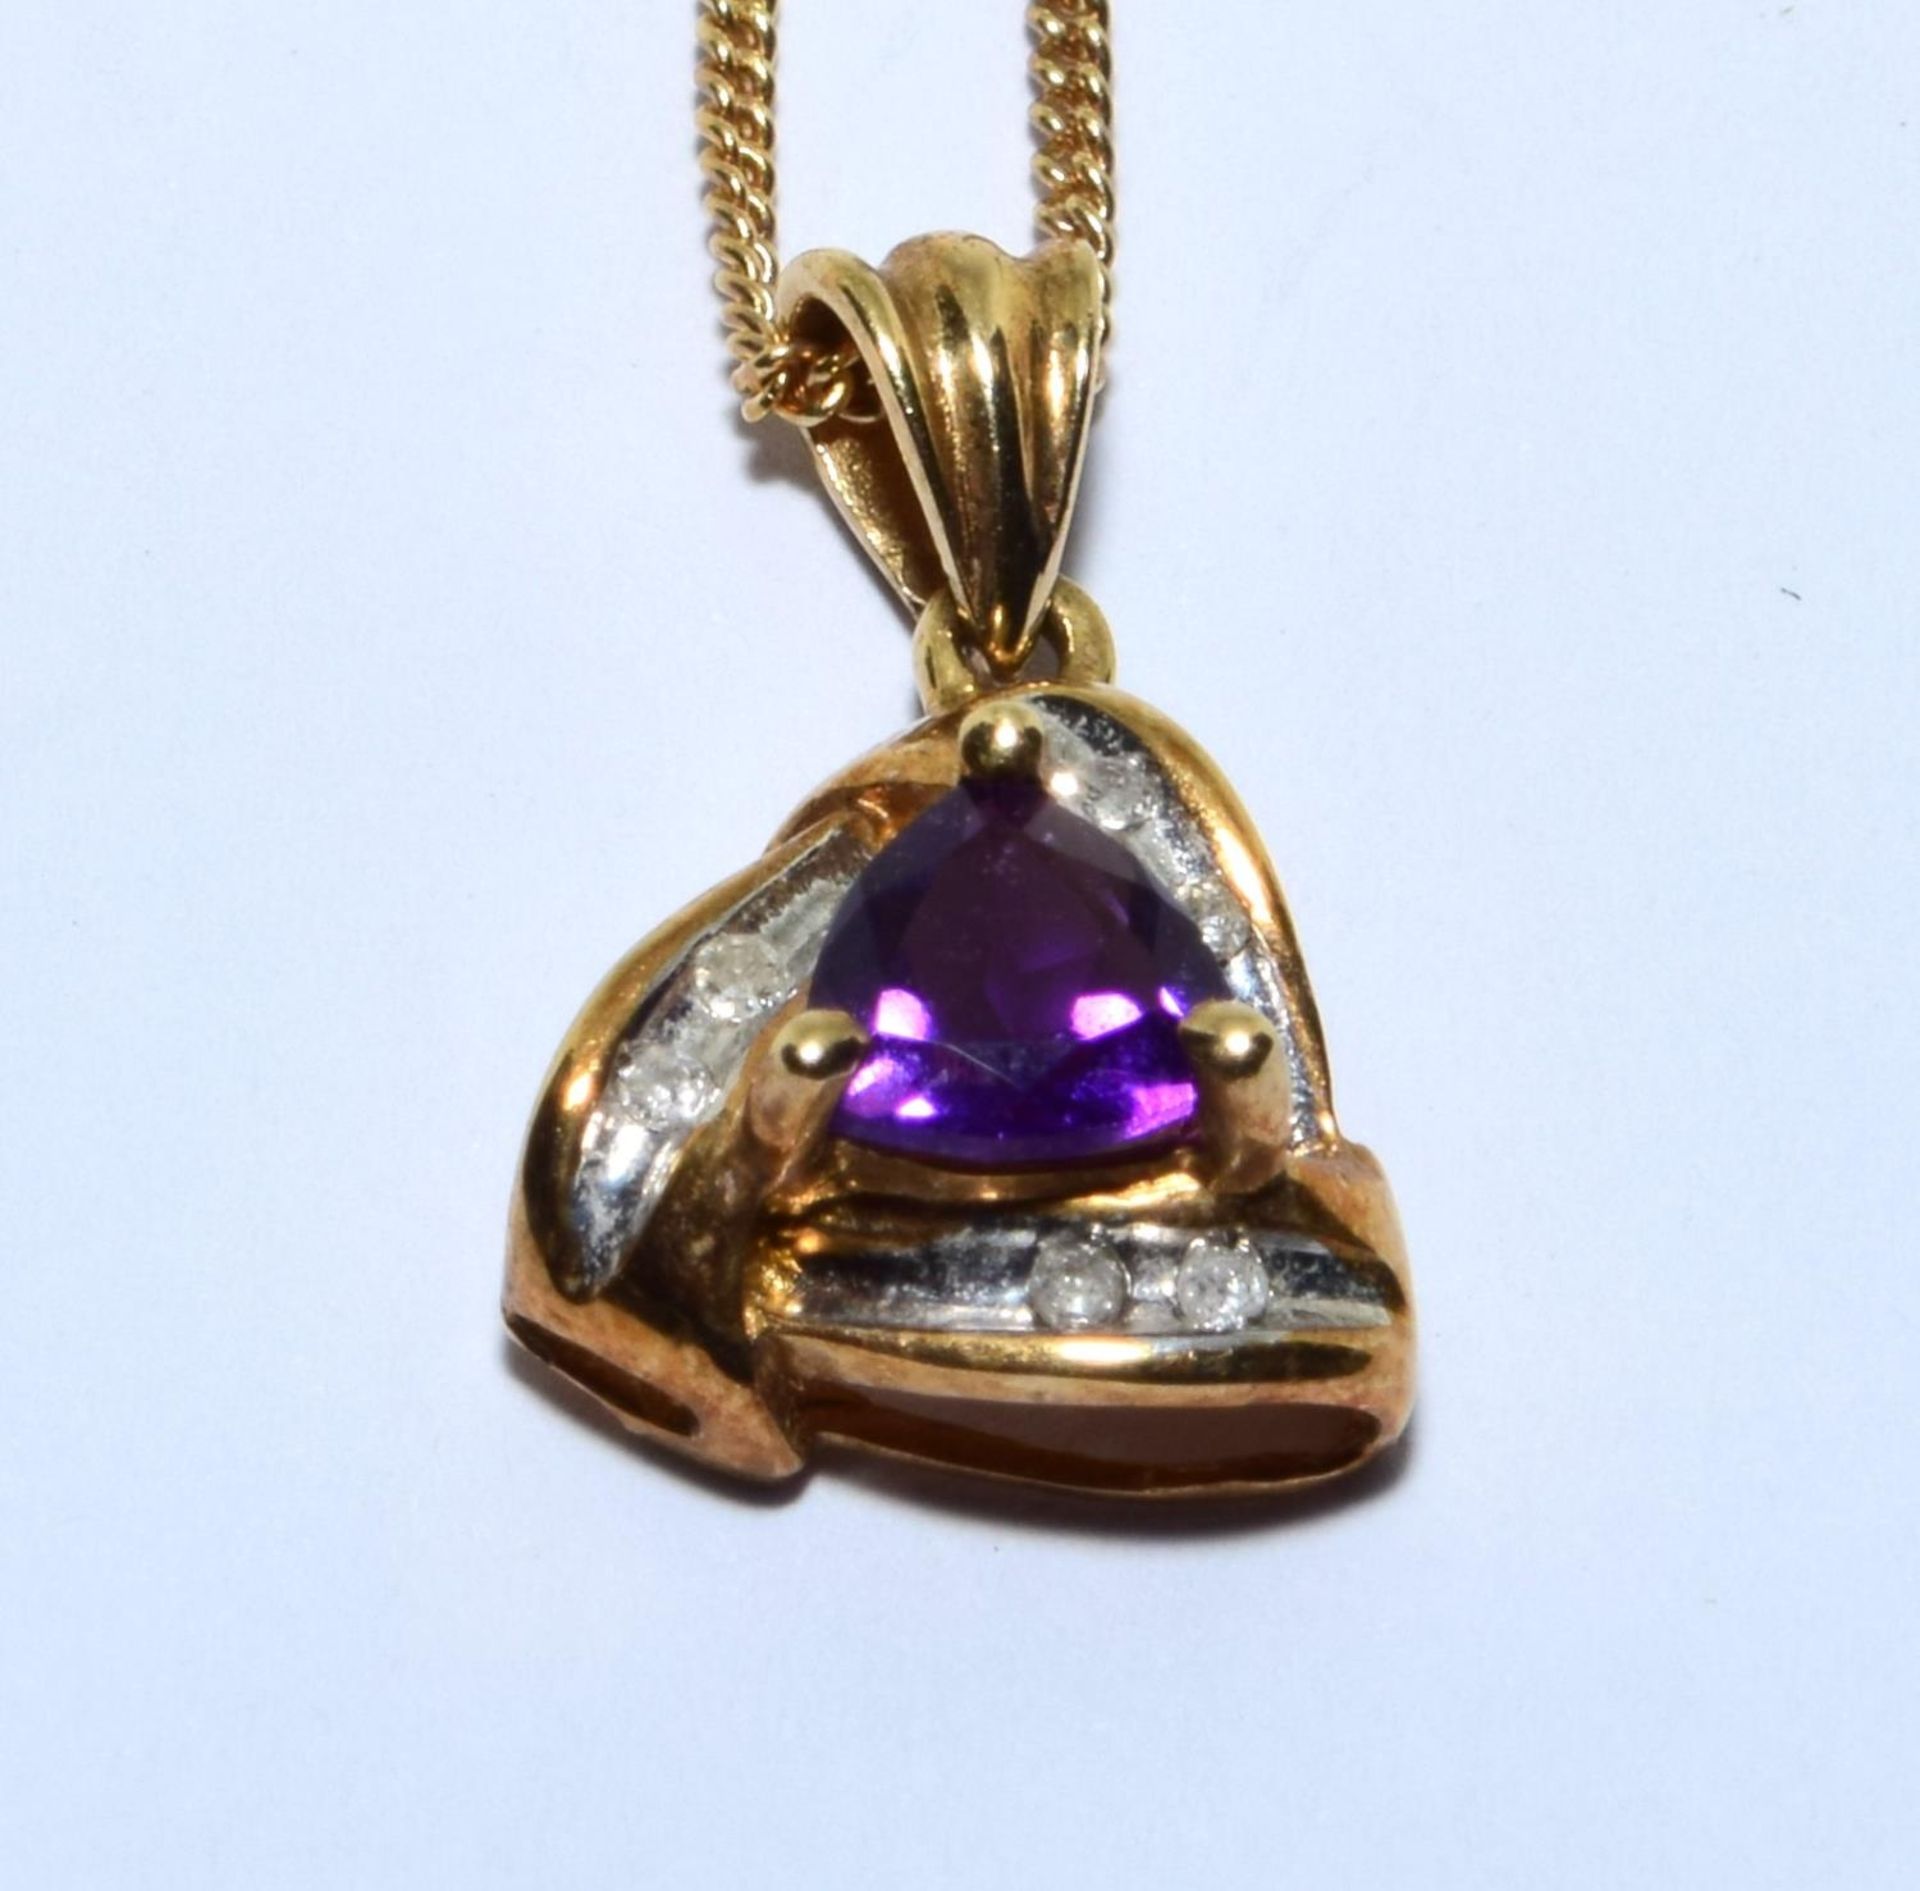 9ct gold Diamond and Amethyst pendant necklace with a chain of 46cm - Image 6 of 6